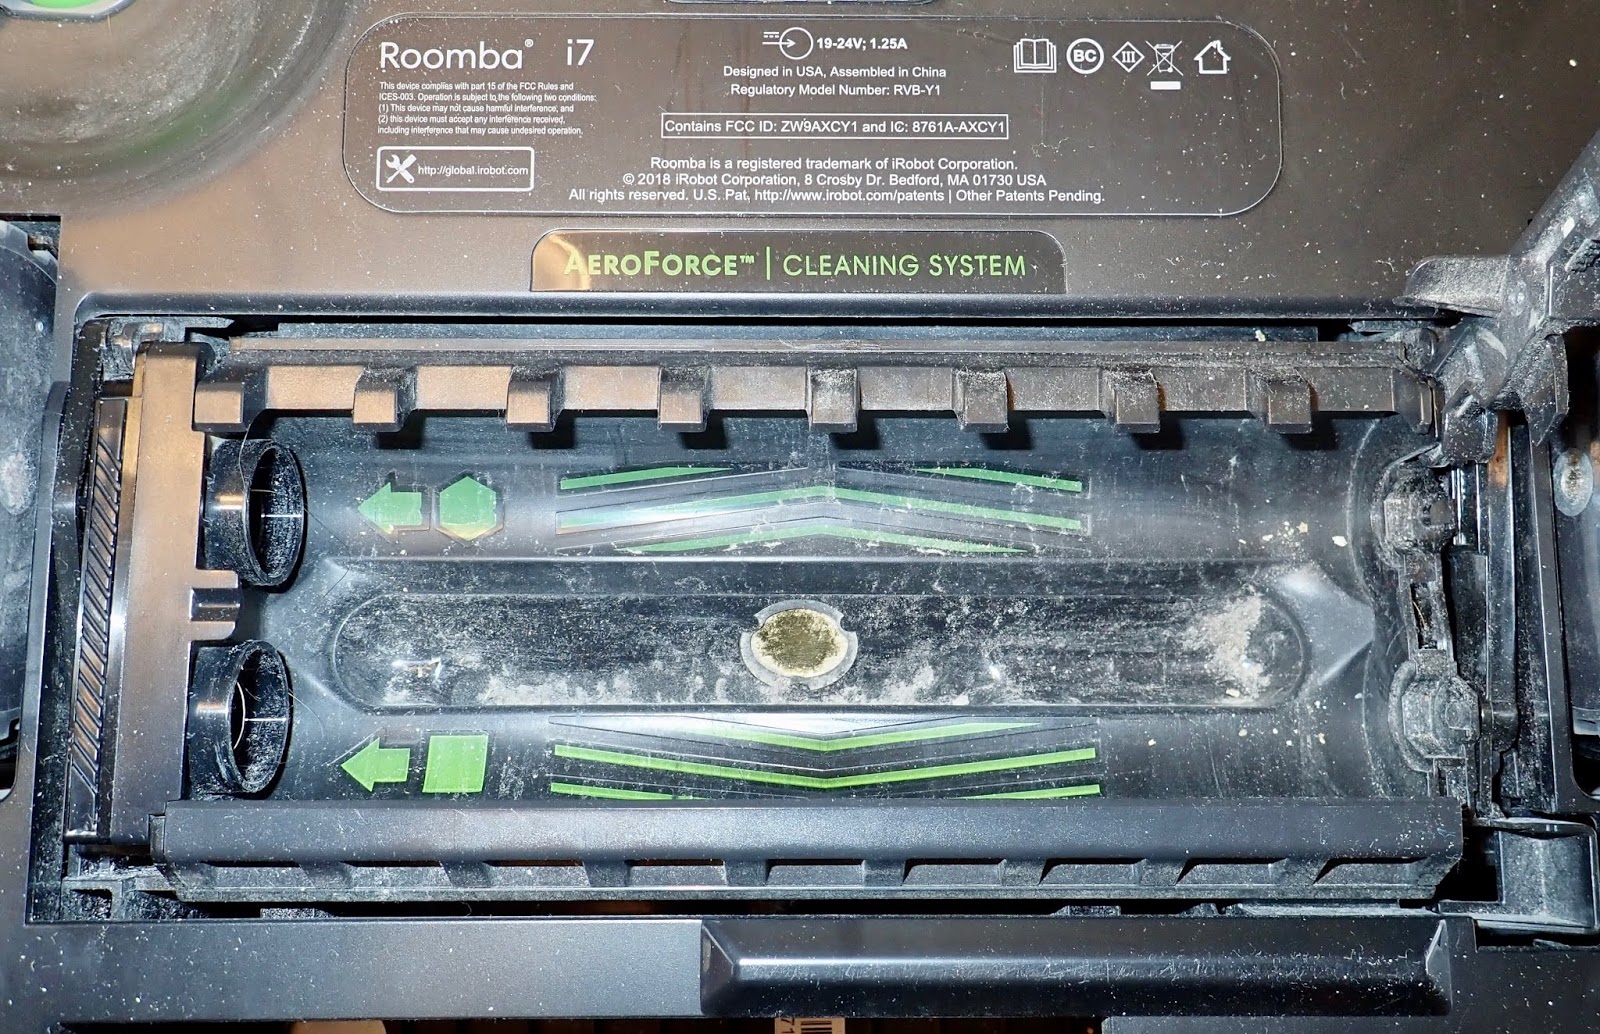 Syonyk S Project Blog Roomba I7 Teardown Why Is There A